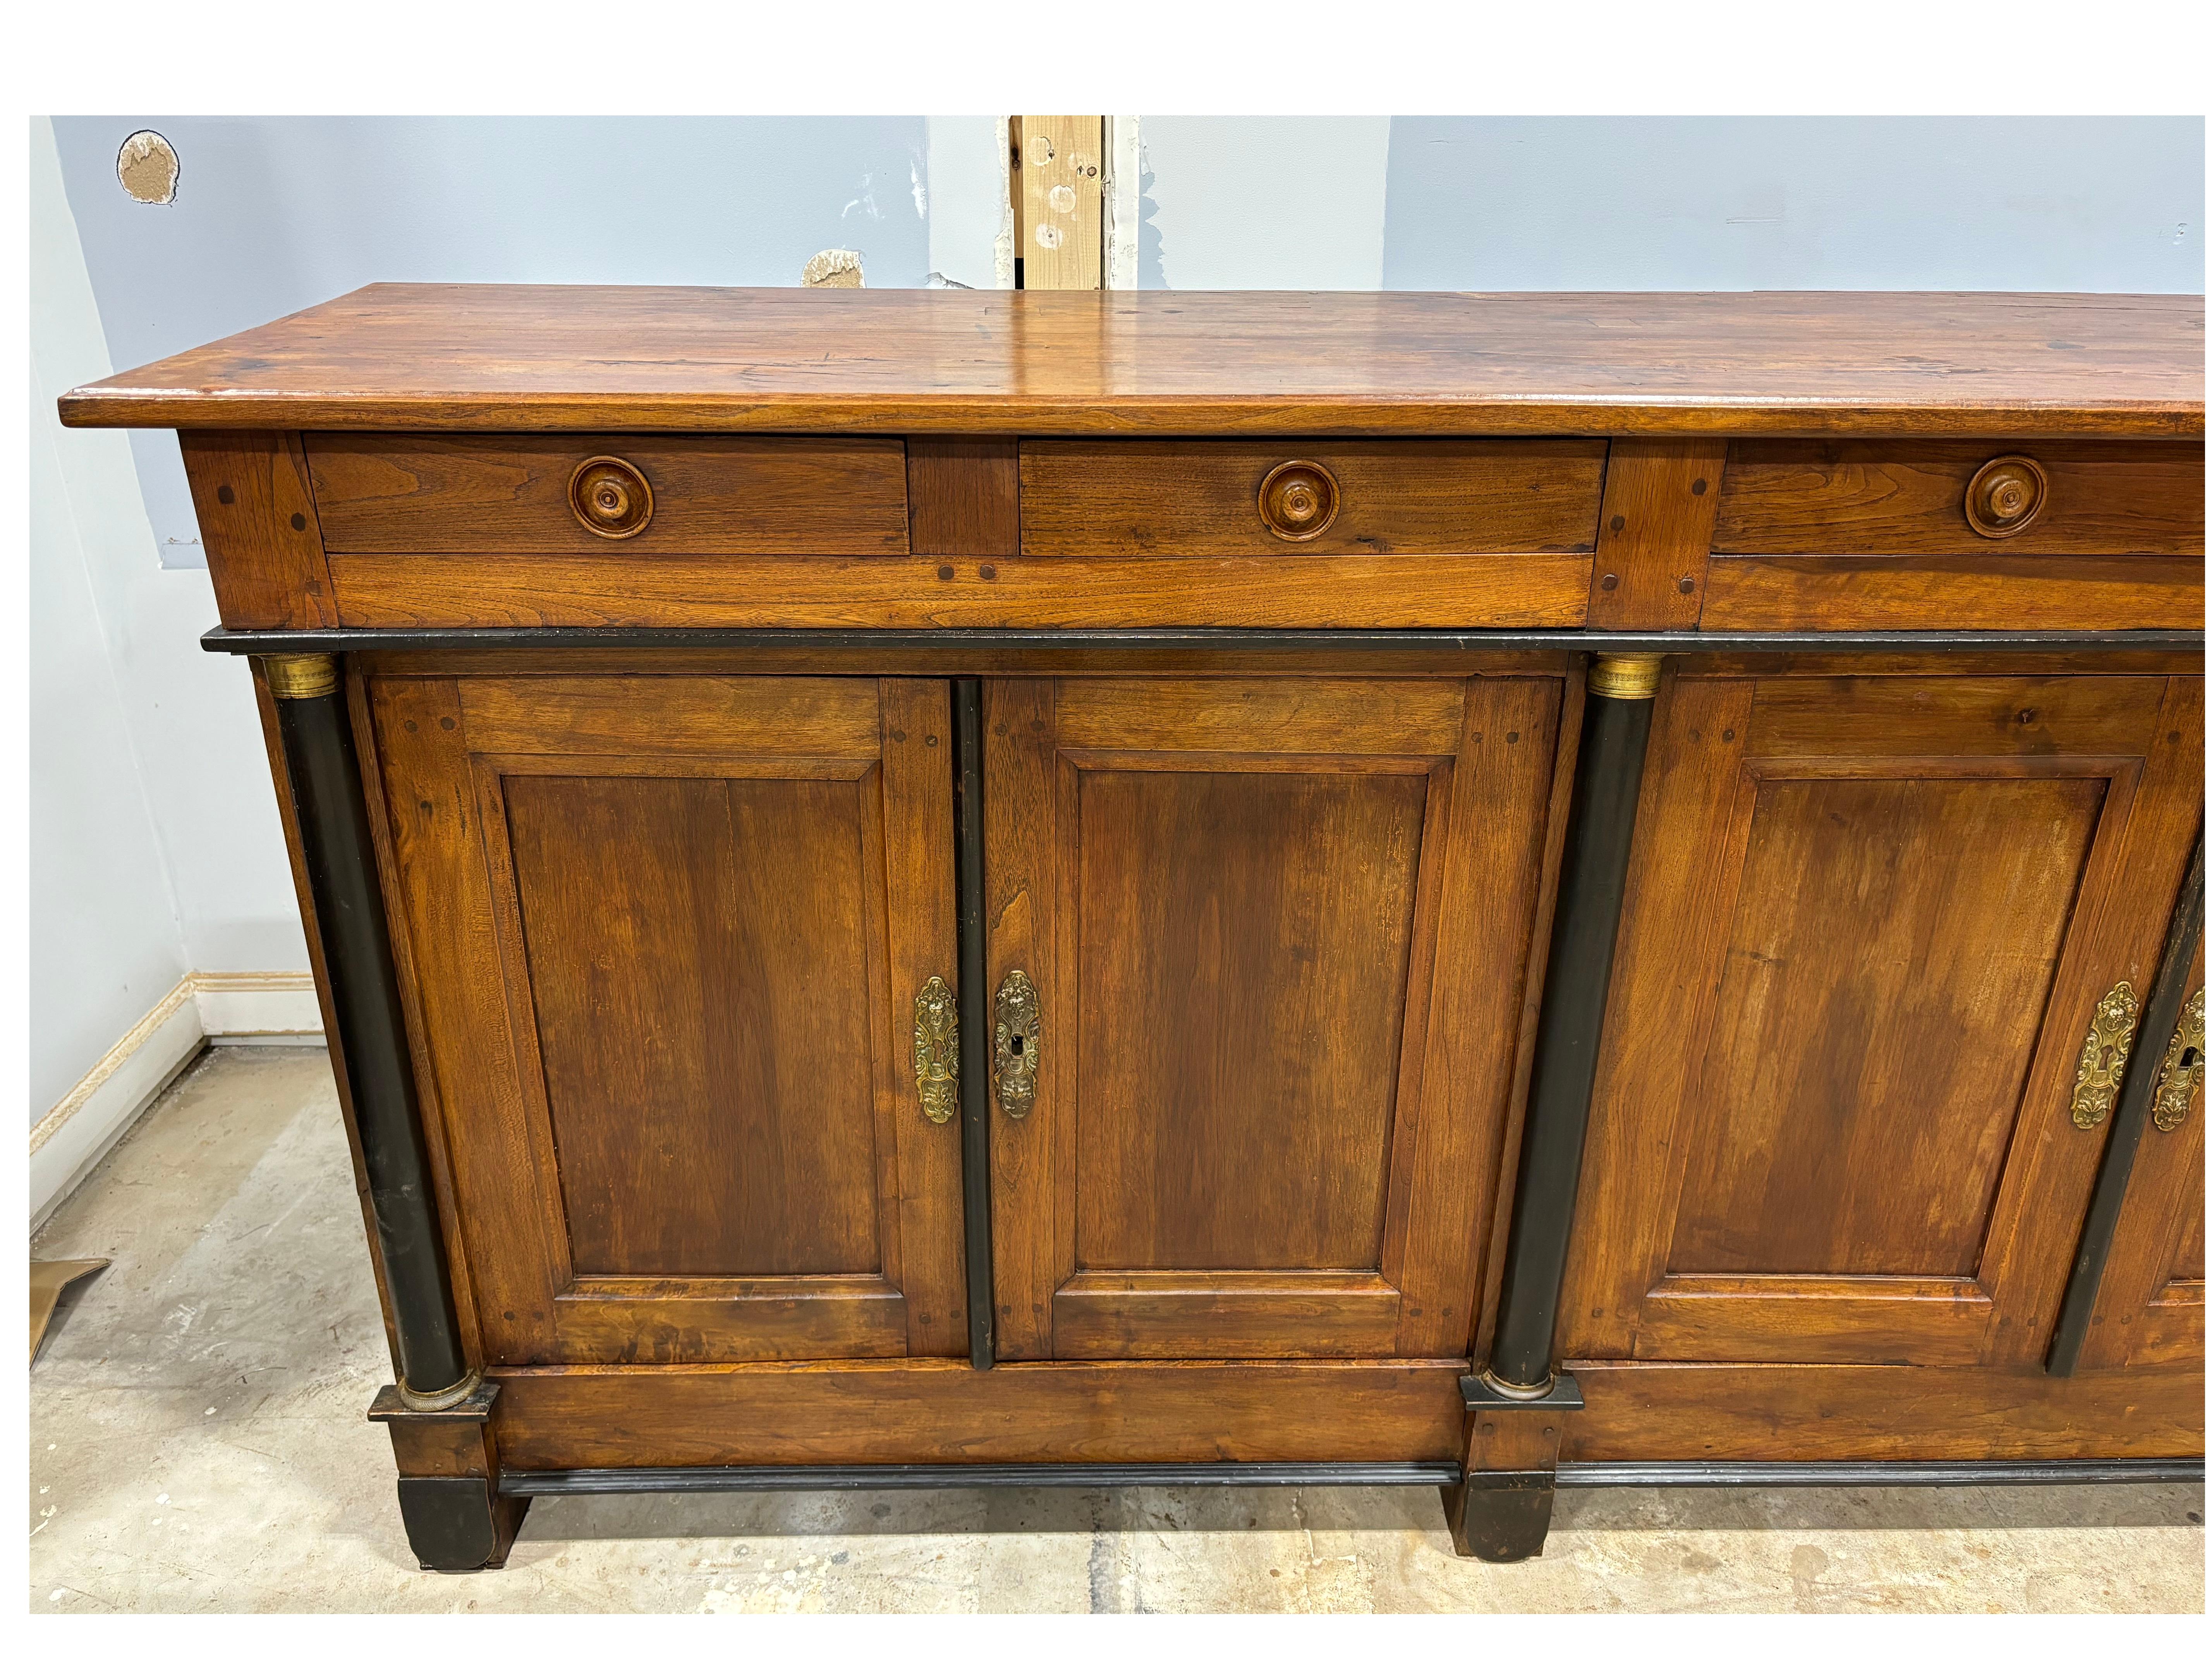 Magnificent French Empire Period Sideboard is made of walnut with brass rings around the columns. 